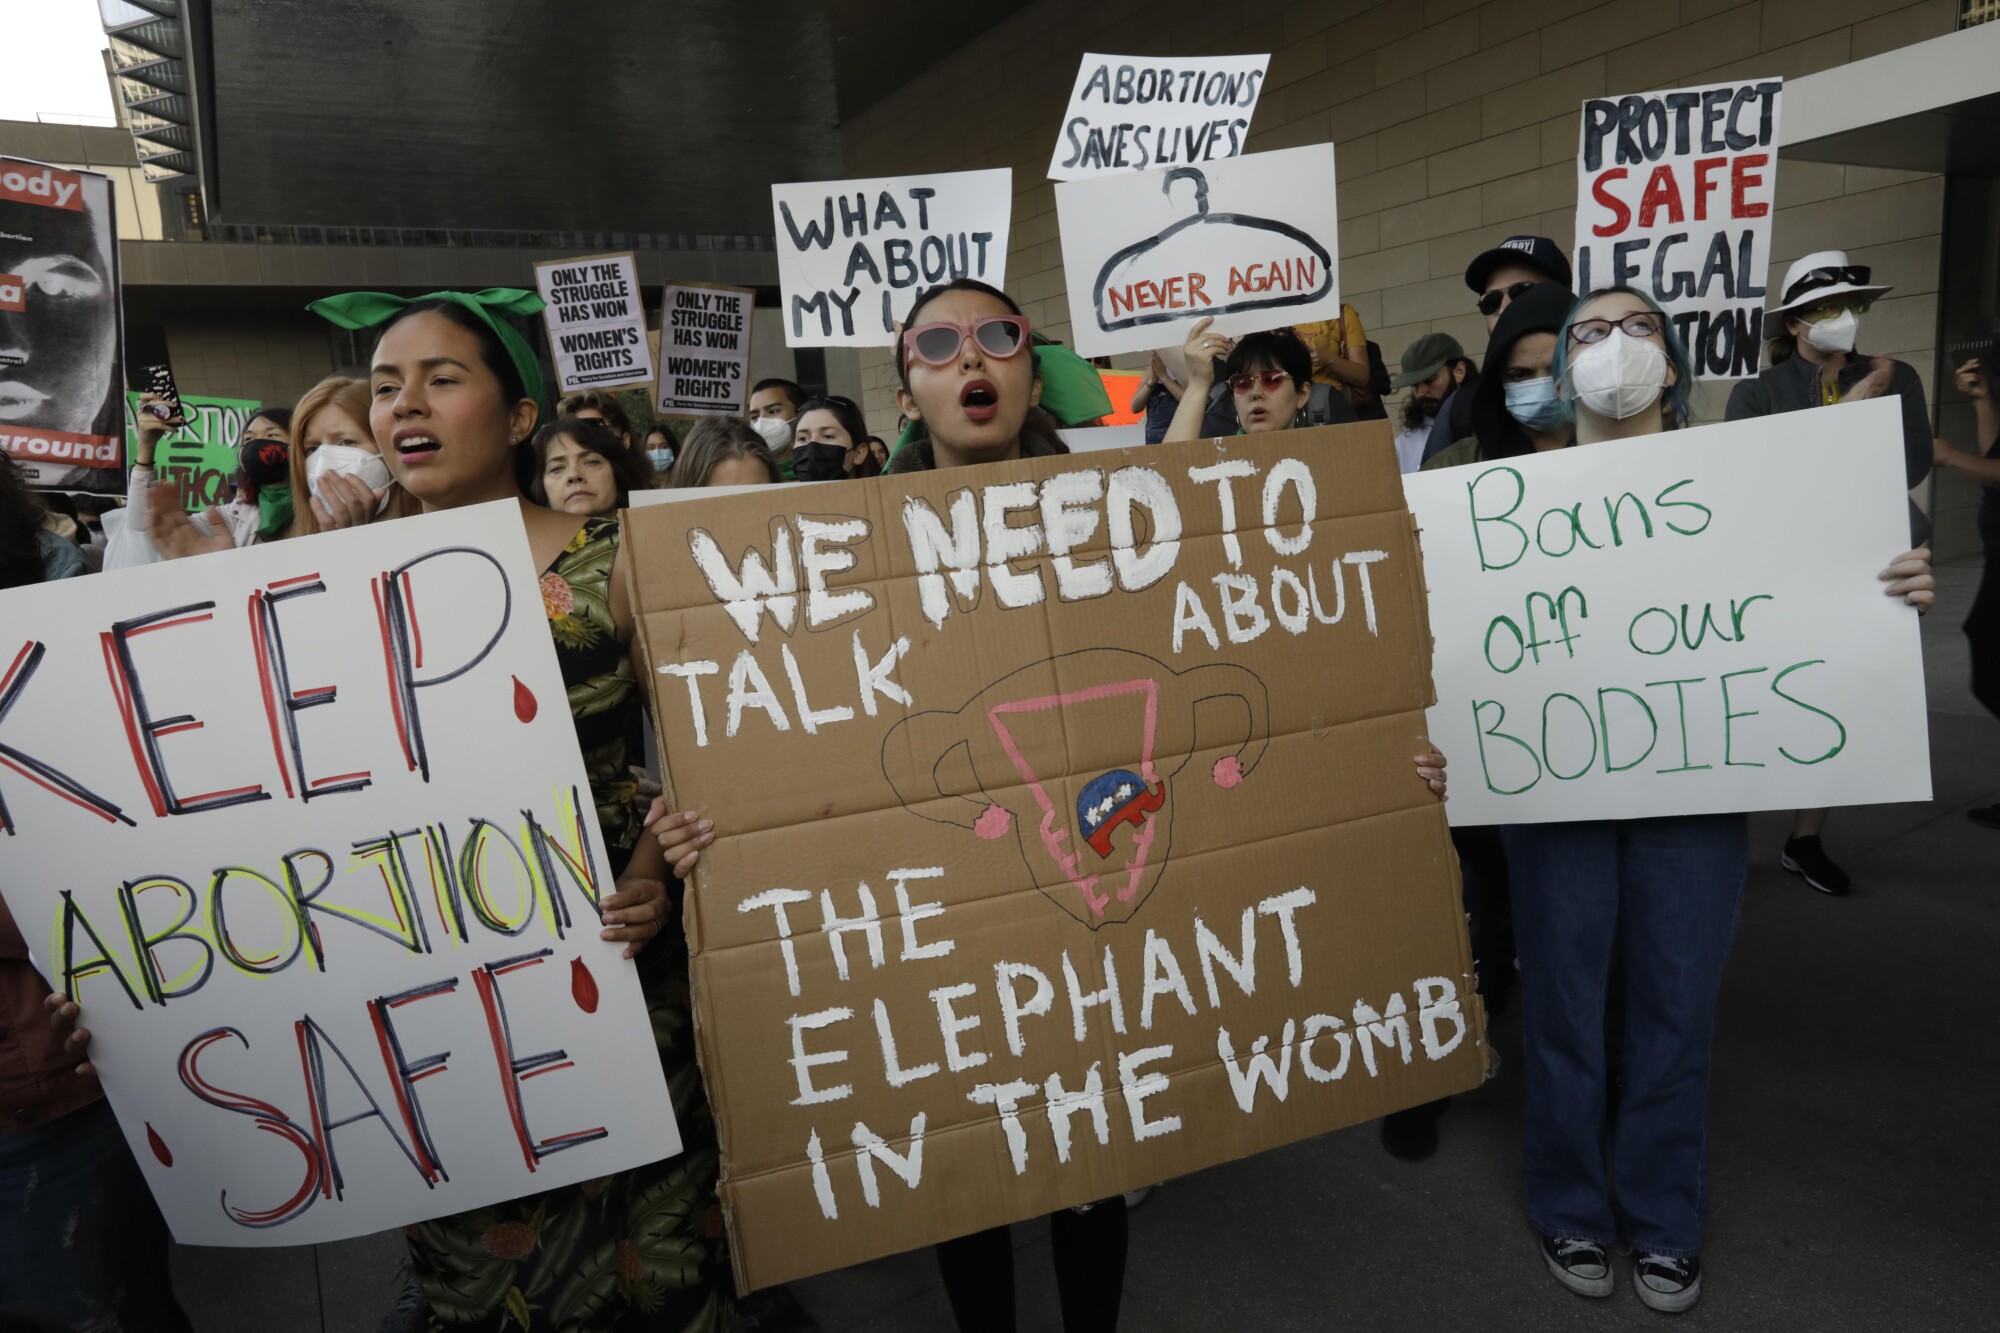 A protester with a sign that says "We need to talk about the elephant in the womb"